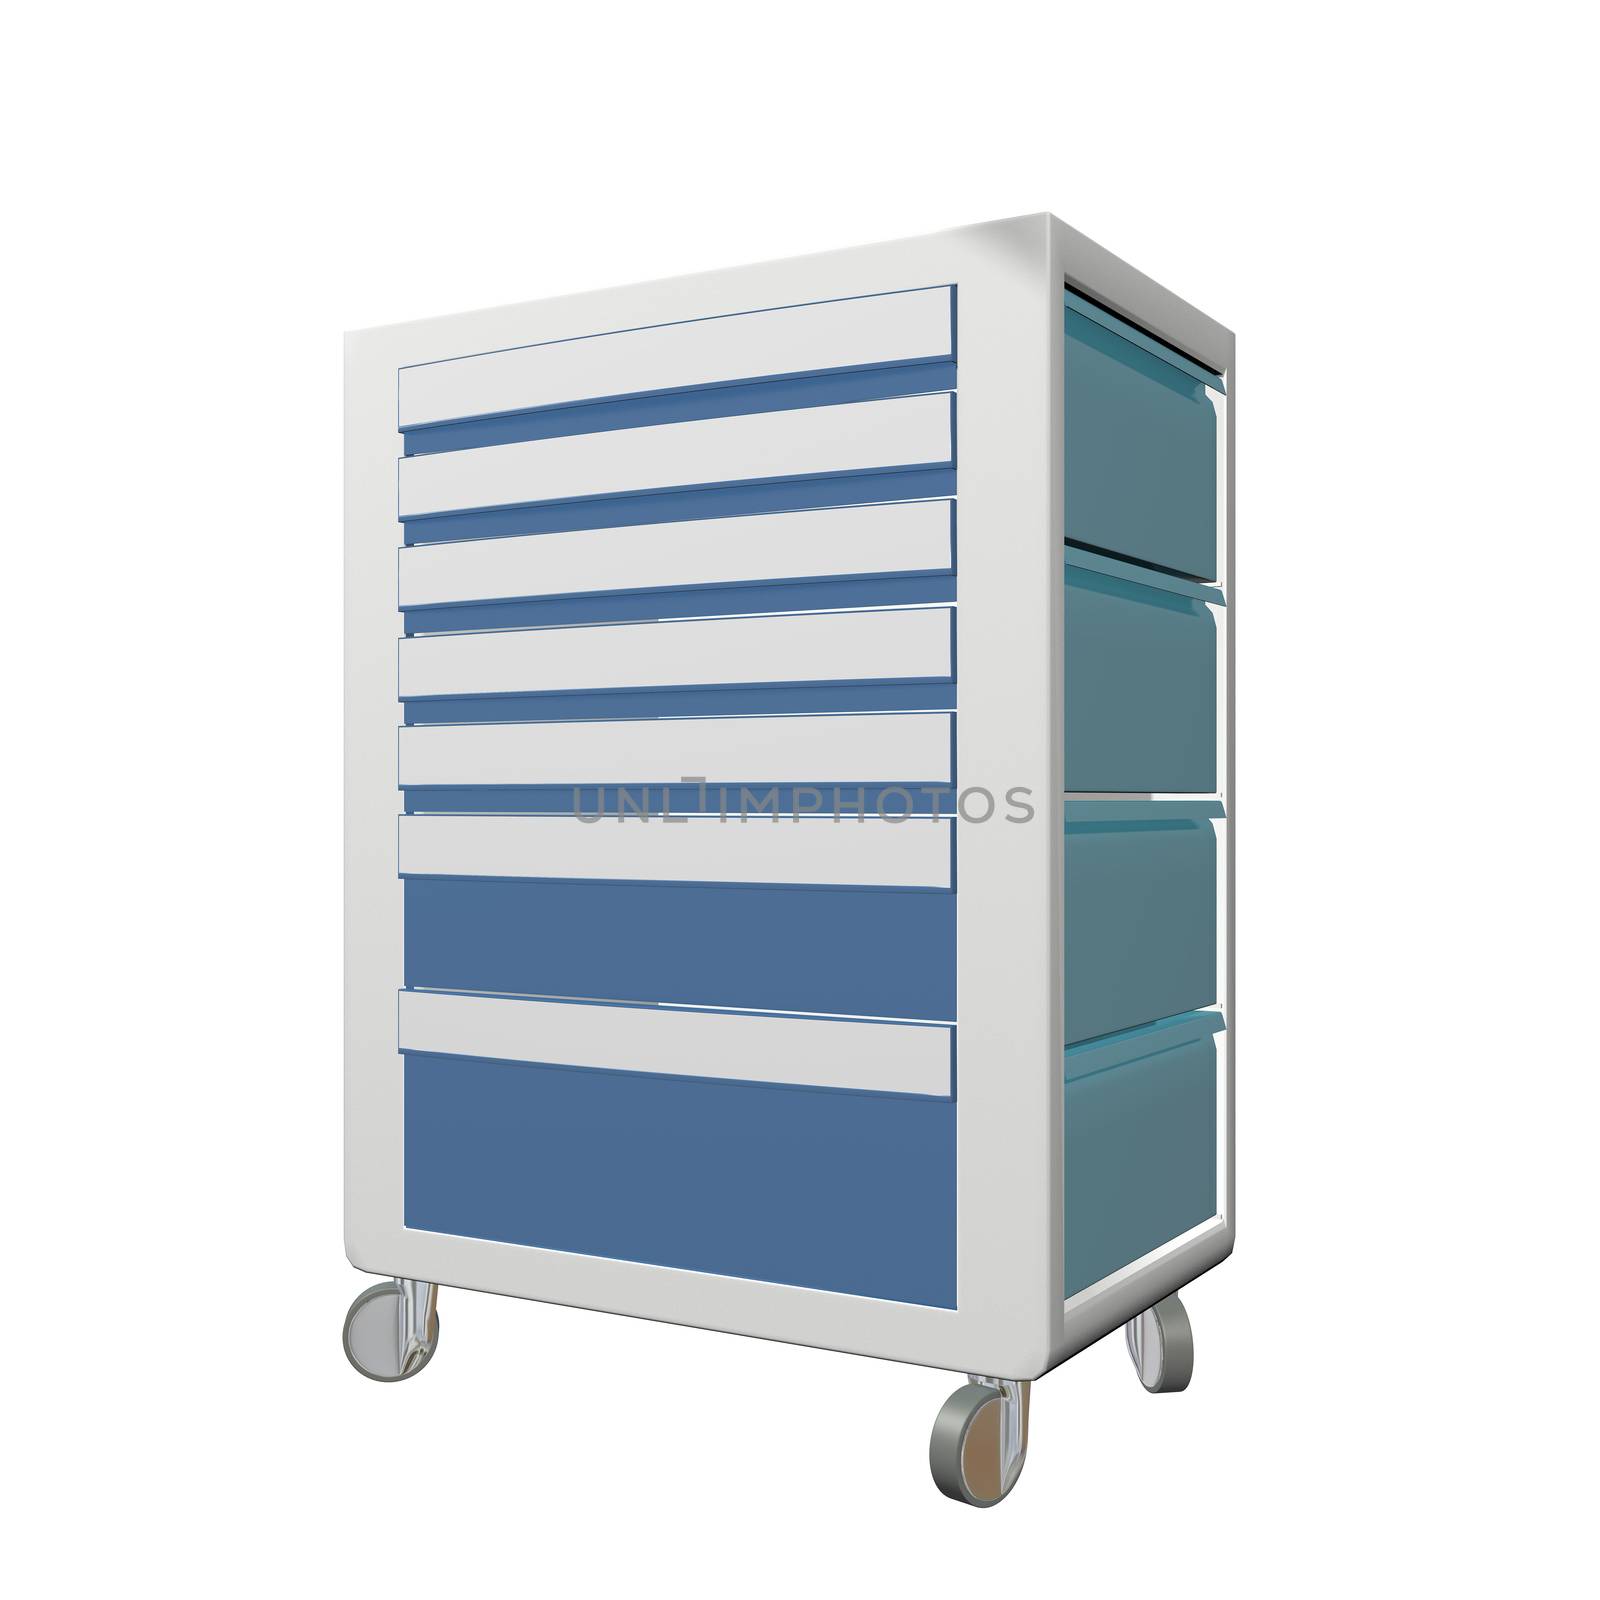 Blue and grey metal medical supply cabinet with wheels, 3D illus by Morphart